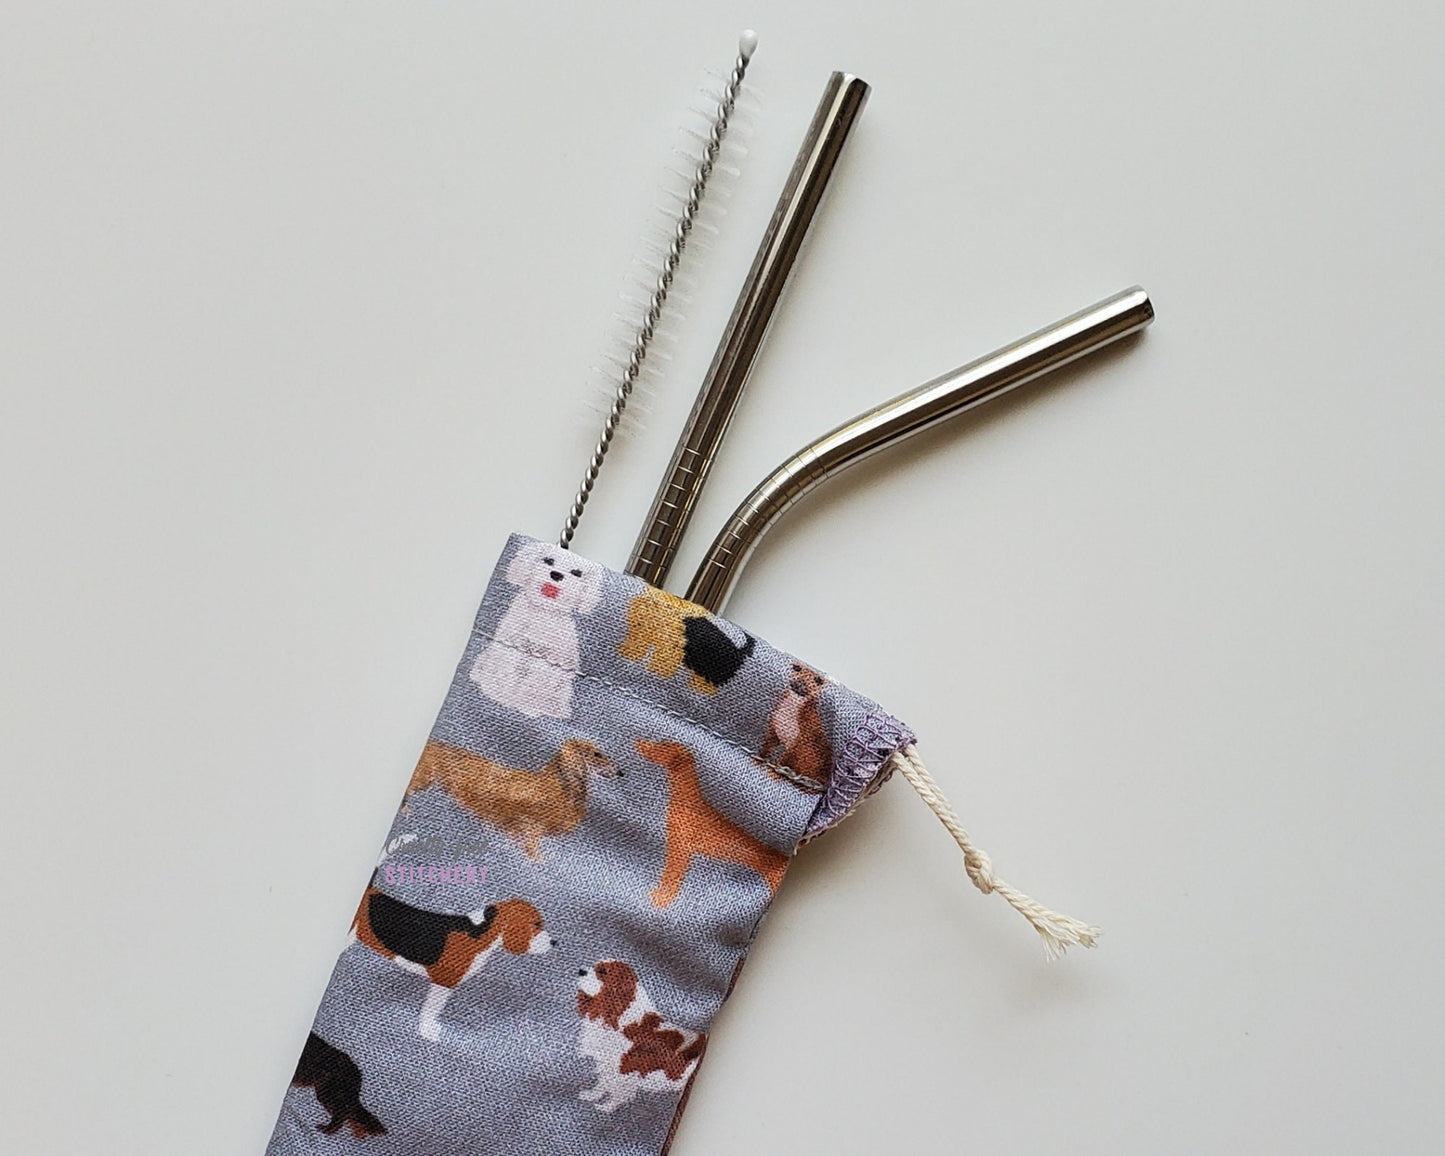 Reusable straw pouch with stainless steel straws sticking out the top. The fabric of the pouch is grey with various dogs printed on, such as beagles, basset hounds, yorkies, etc, and it has a drawstring closure.